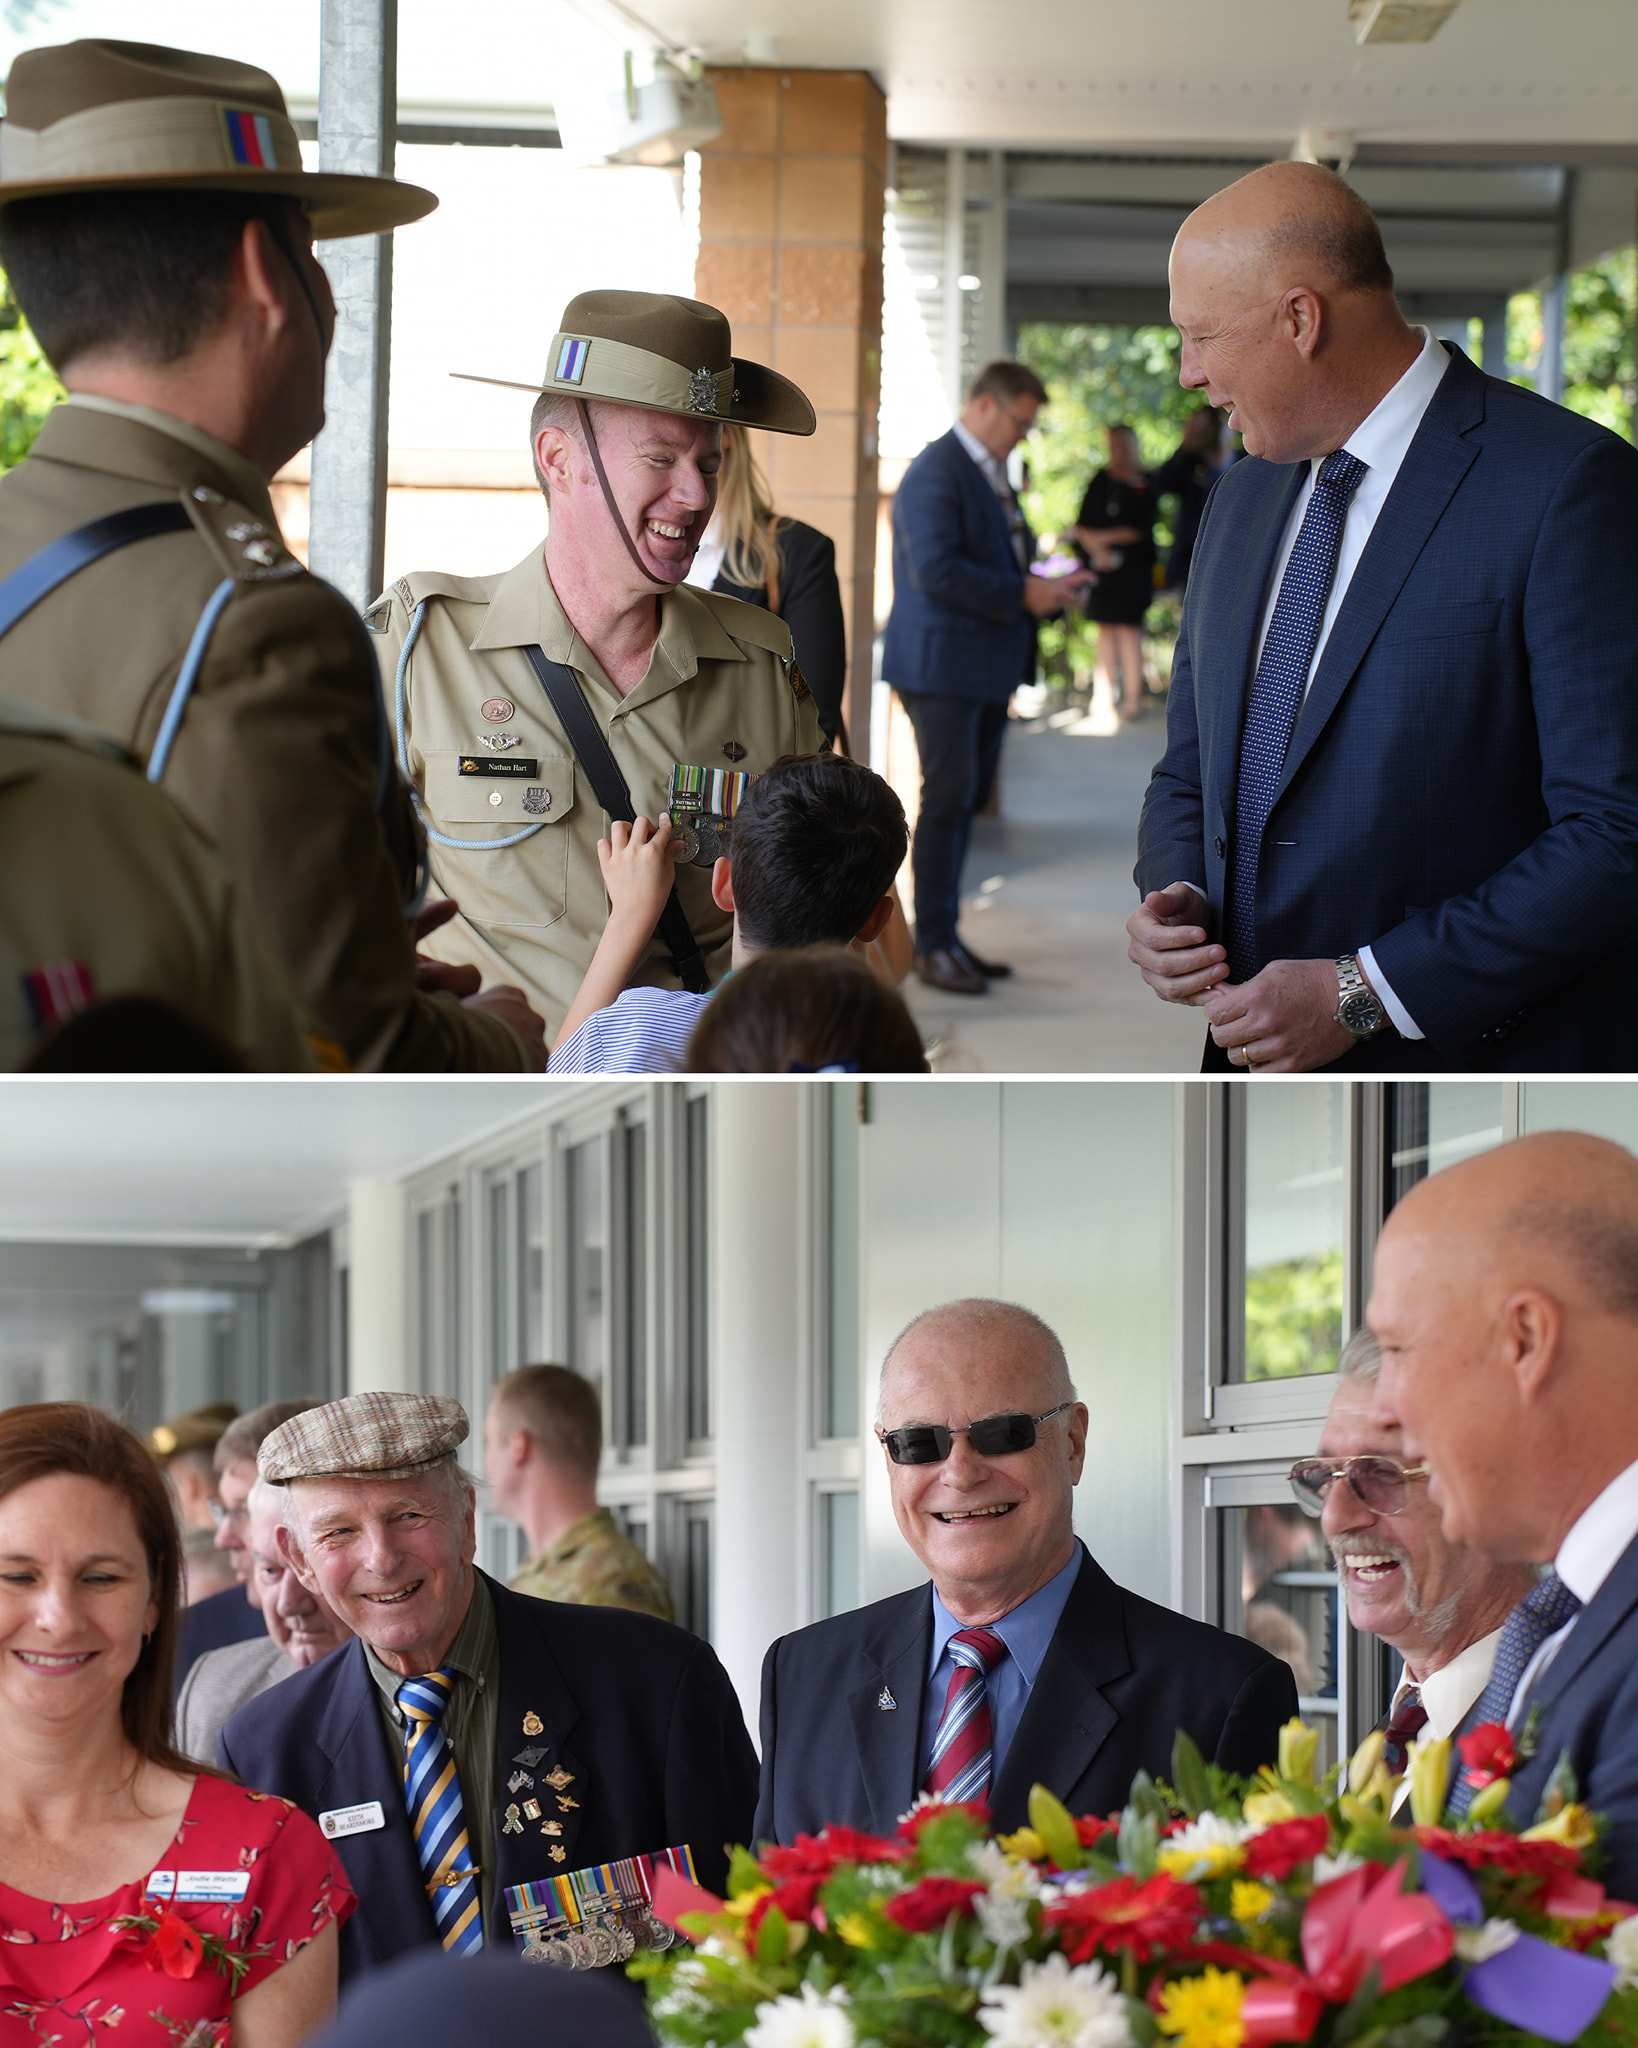 Peter Dutton: A beautiful and poignant Anzac Day commemorative service along wi…